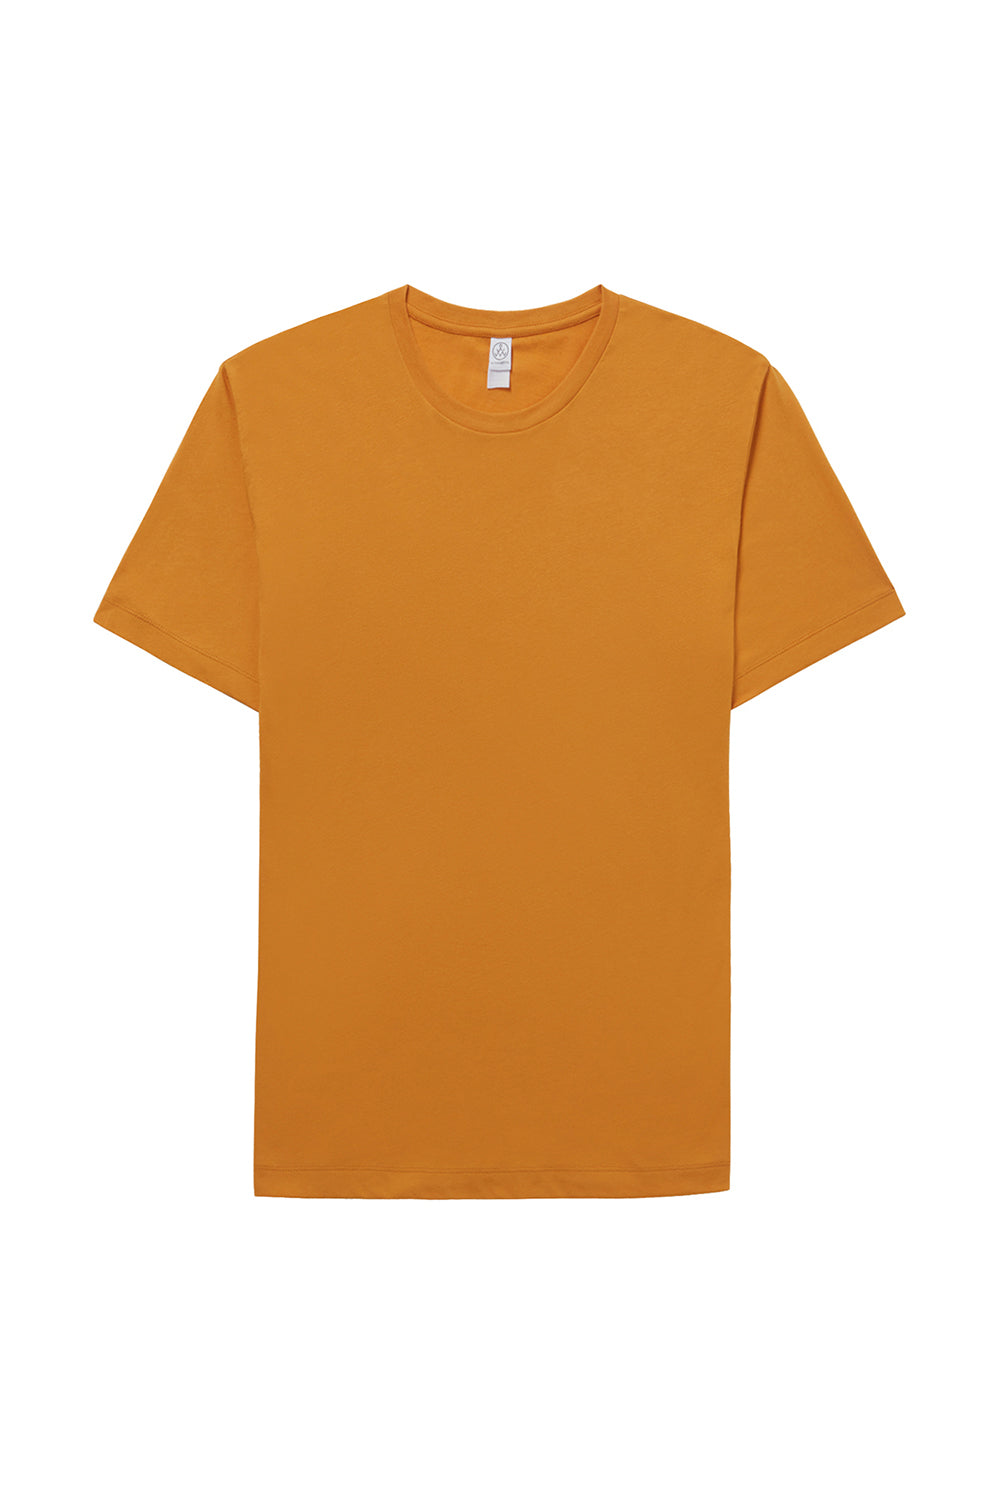 Alternative AA1070/1070 Mens Go To Jersey Short Sleeve Crewneck T-Shirt Stay Gold Flat Front